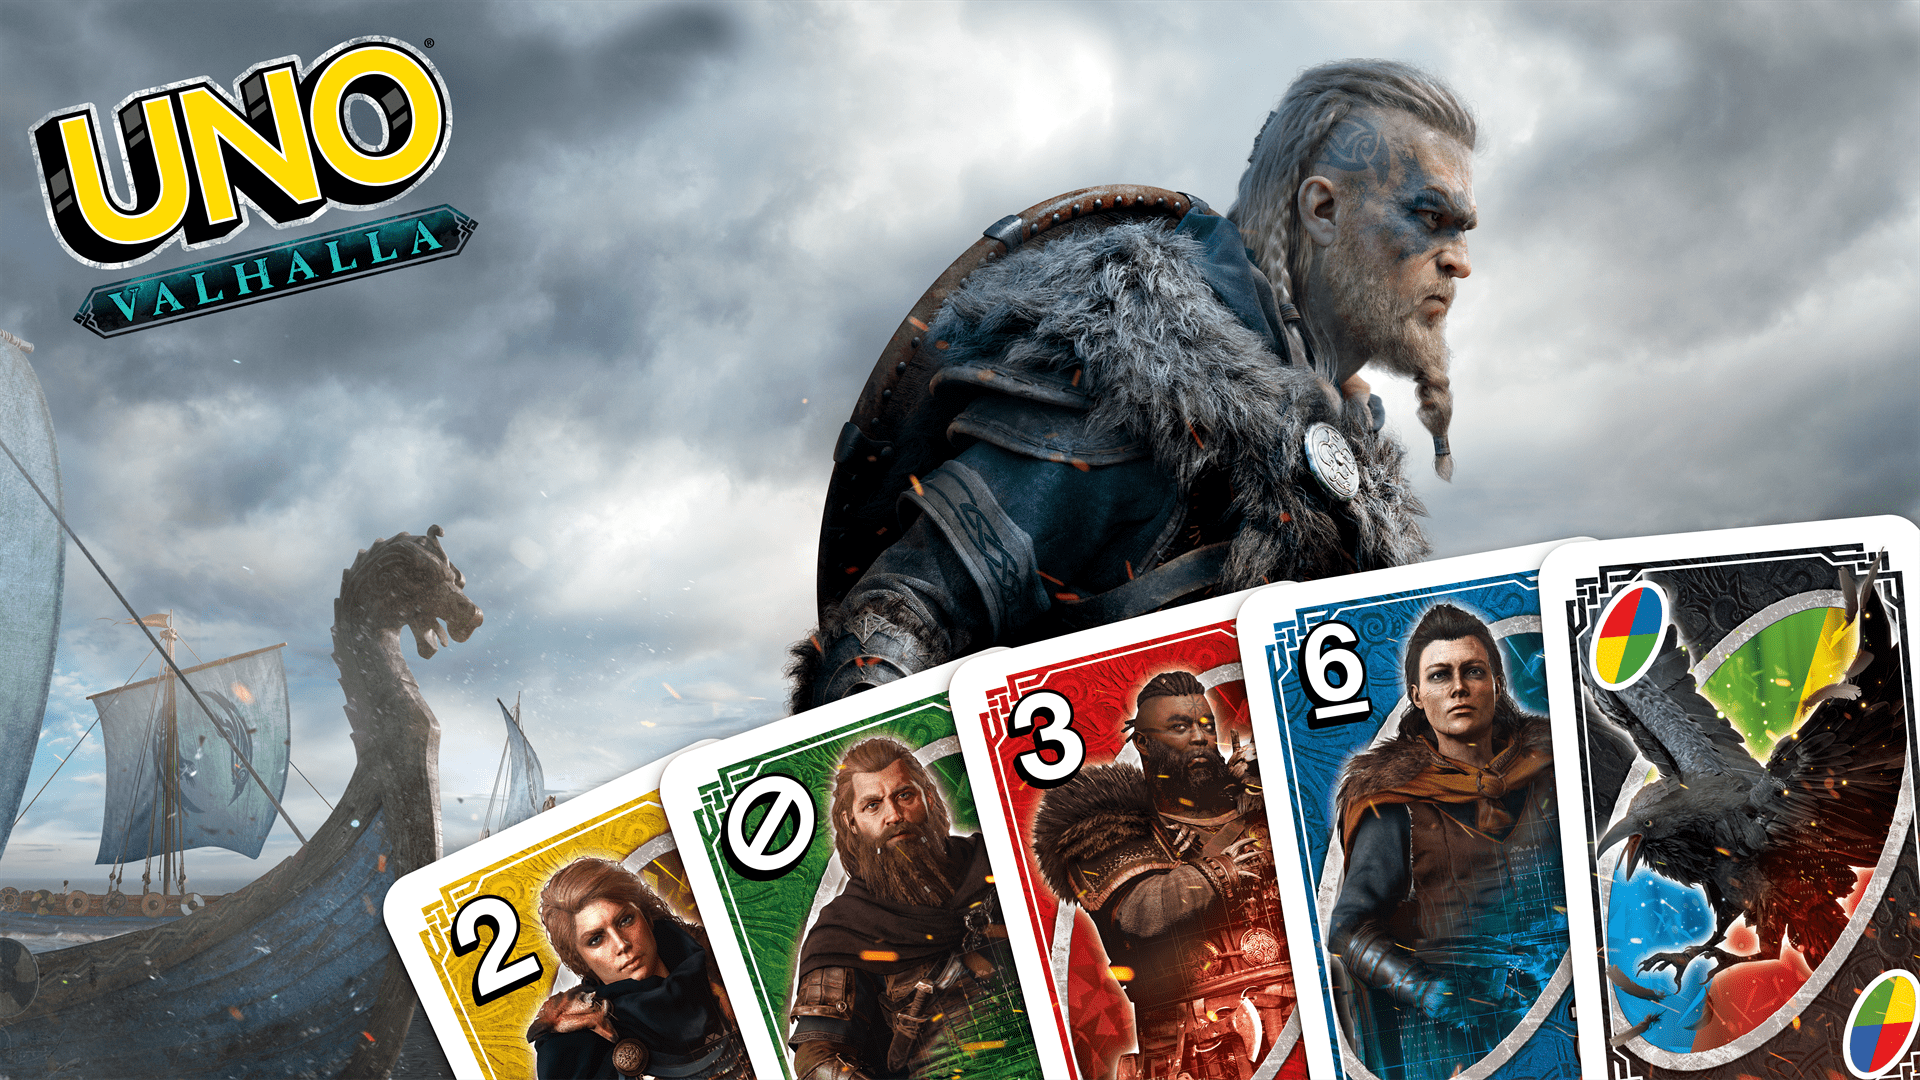 Play Cards like Vikings in UNO® Valhalla DLC